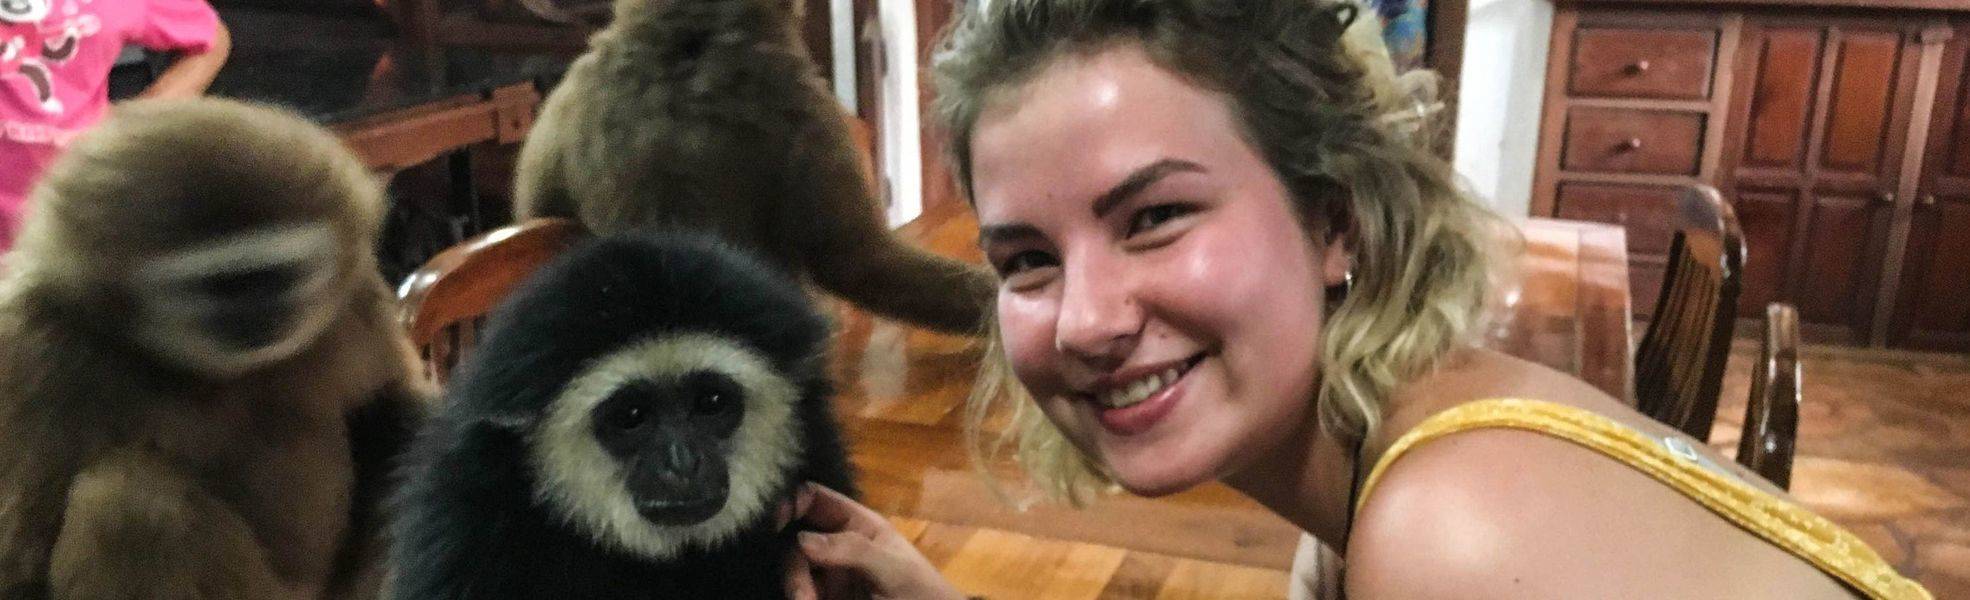 Volunteer on her internship abroad in Asia with monkeys